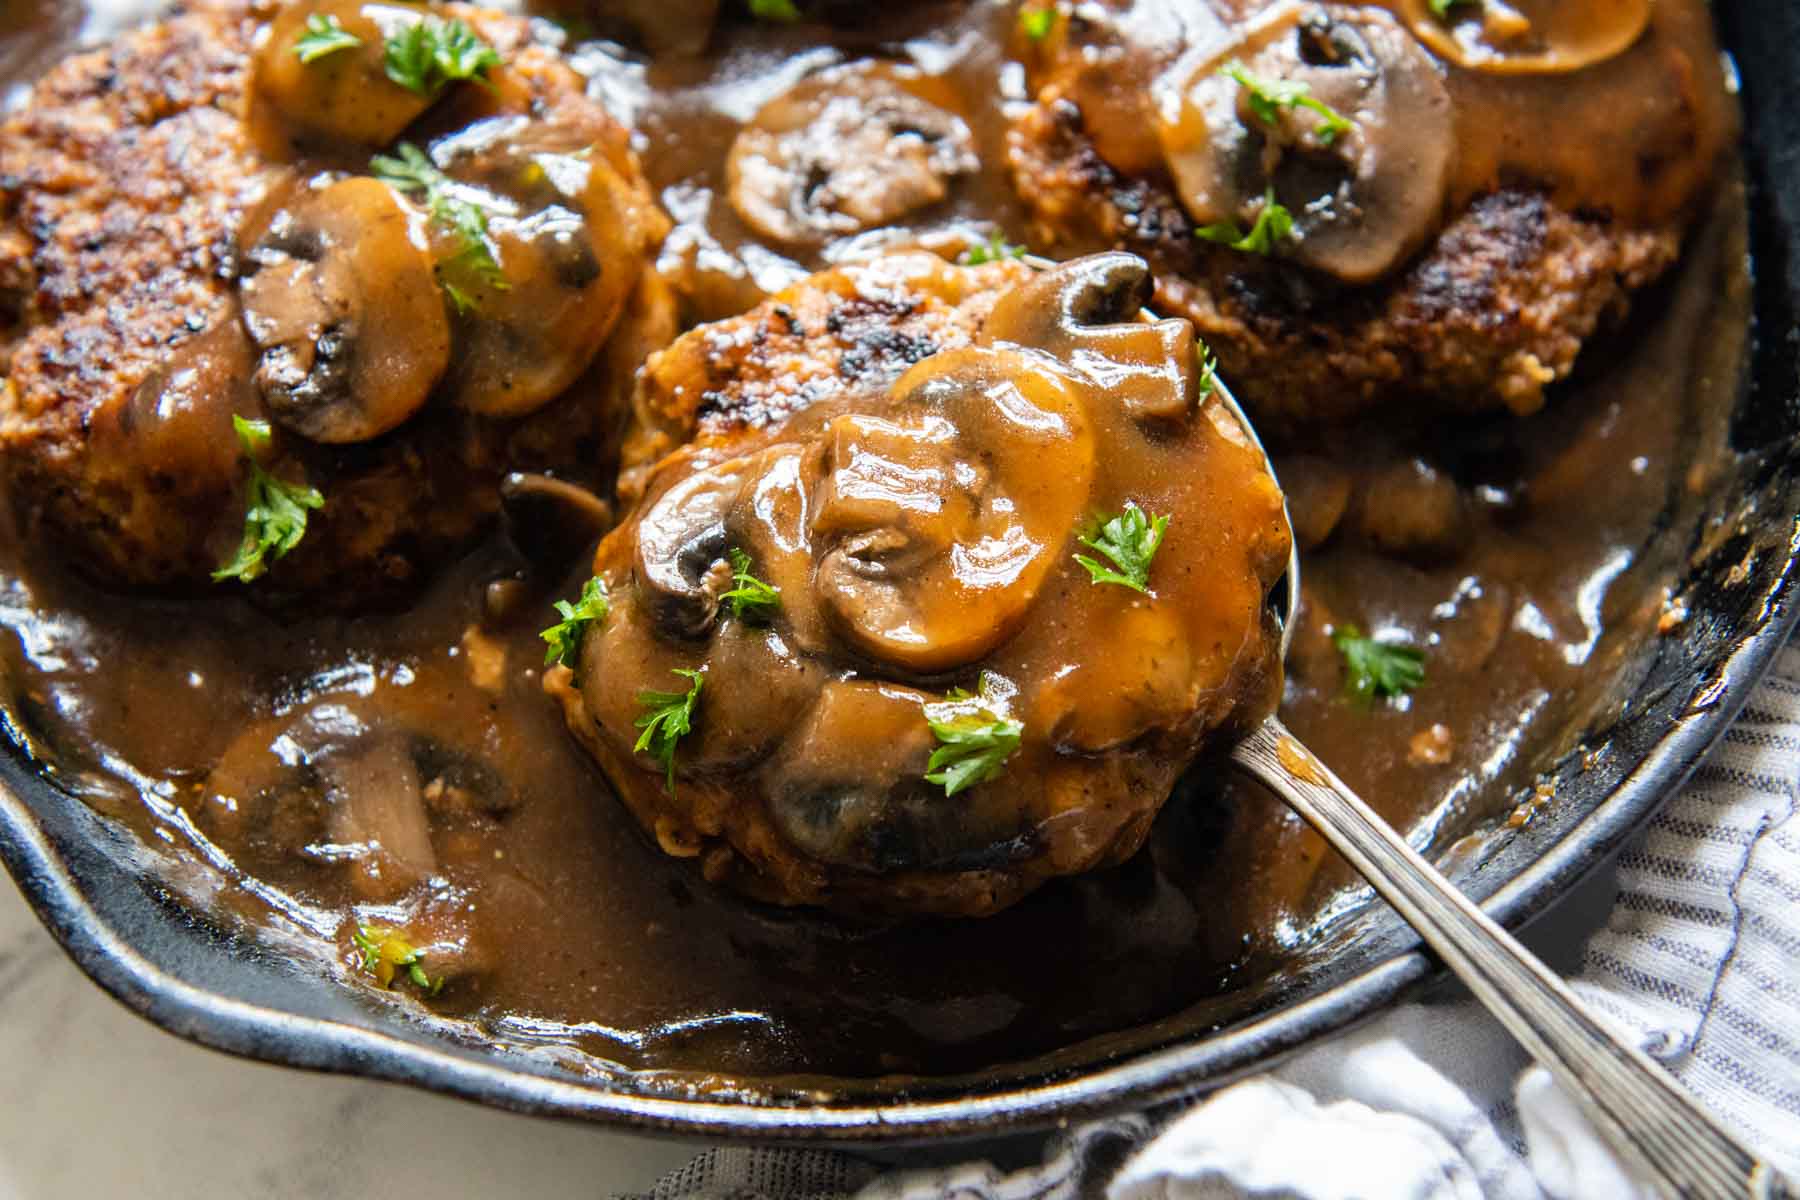 a spoon lifting up a salisbury steak with mushrooms on top from a skillet.